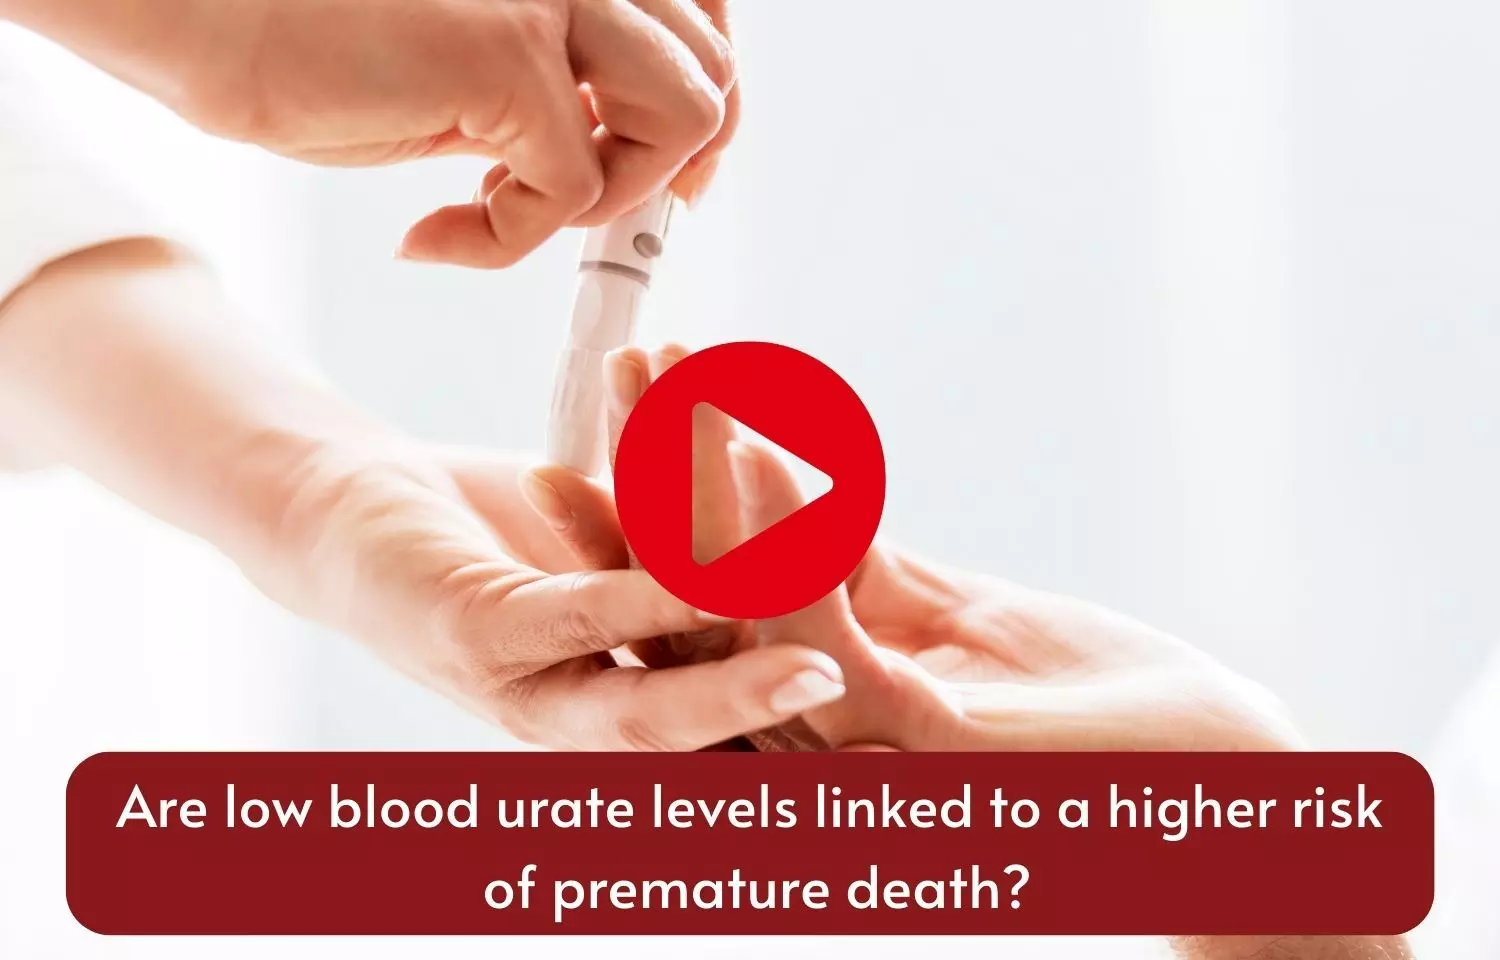 Are low blood urate levels linked to a higher risk of premature death?